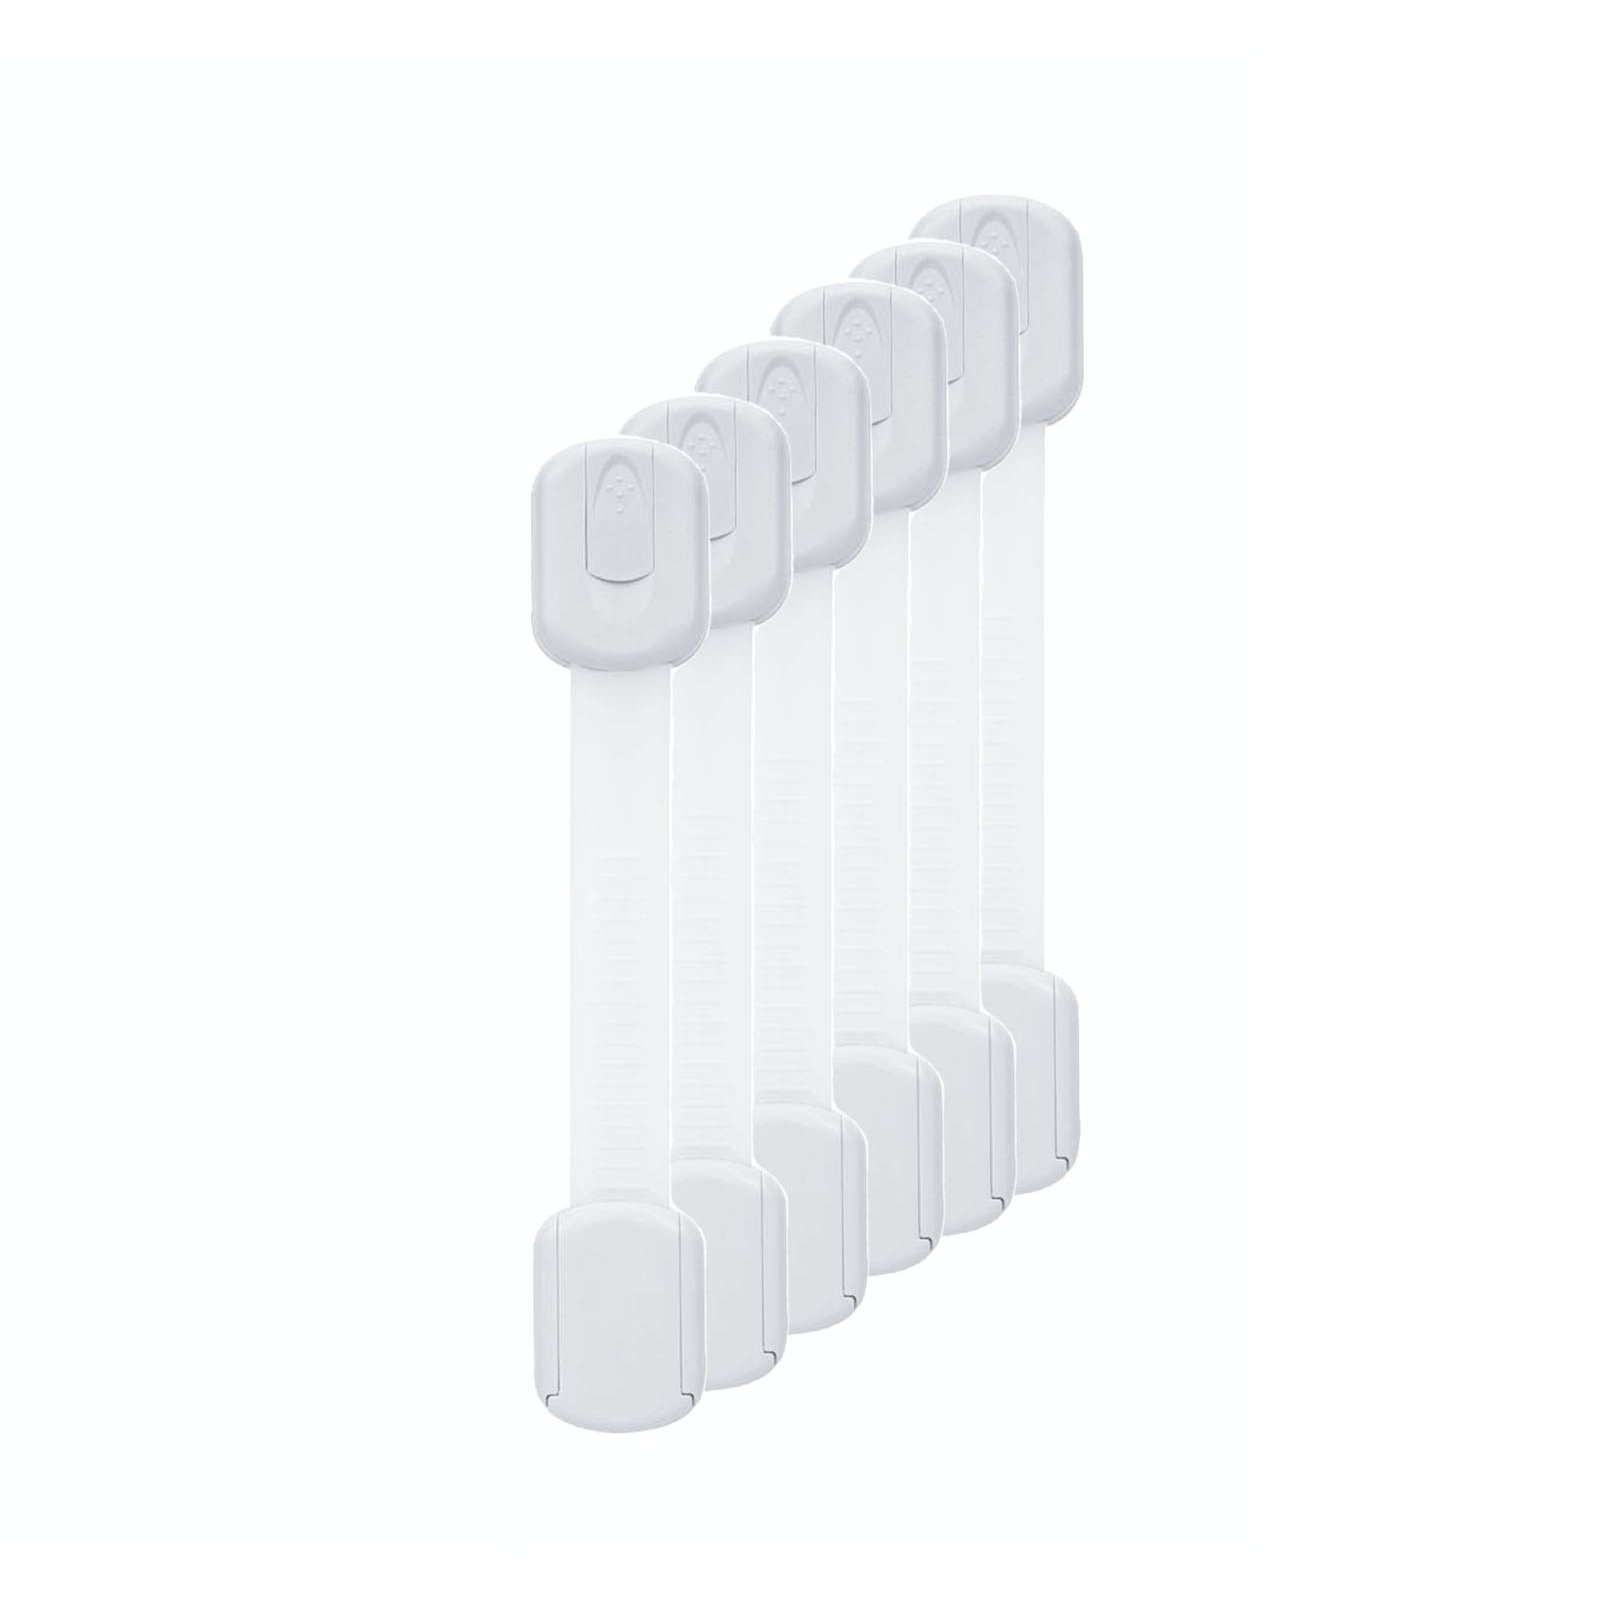 6-Piece Baby Protection Cabinet Lock Set